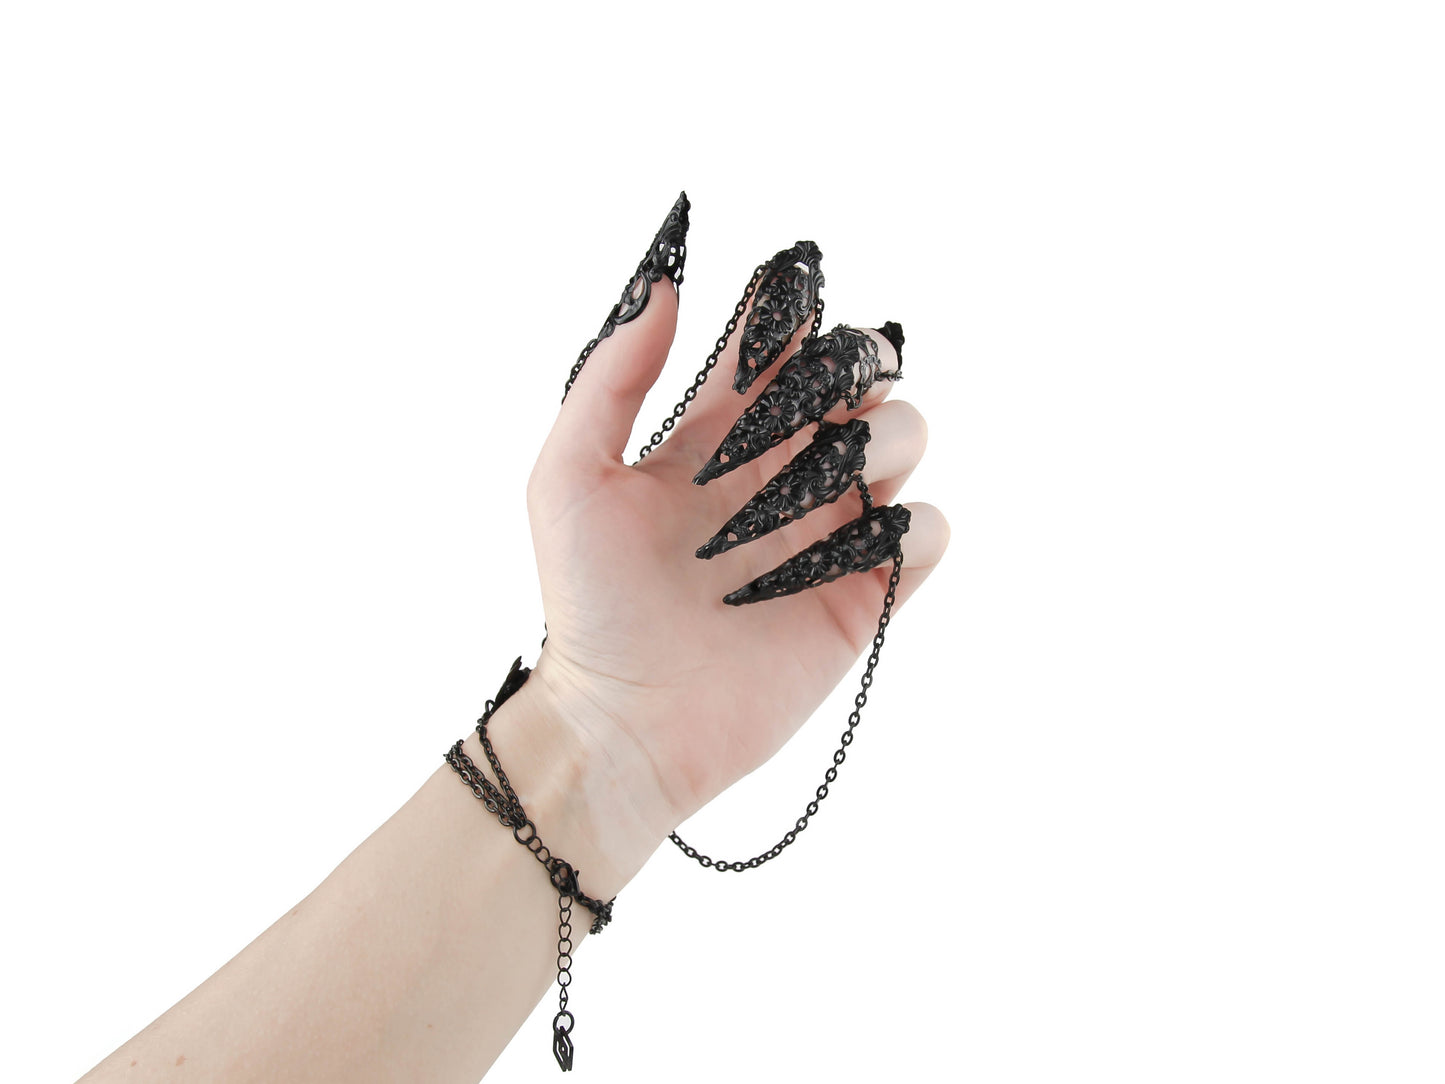 Elevate your style with this Myril Jewels black hand chain bracelet, a vision of neo-goth craftsmanship. Each black chain drapes elegantly from a wrist cuff to filigree claw rings, perfect for gothic-chic fashion lovers and a standout choice for bold everyday wear.